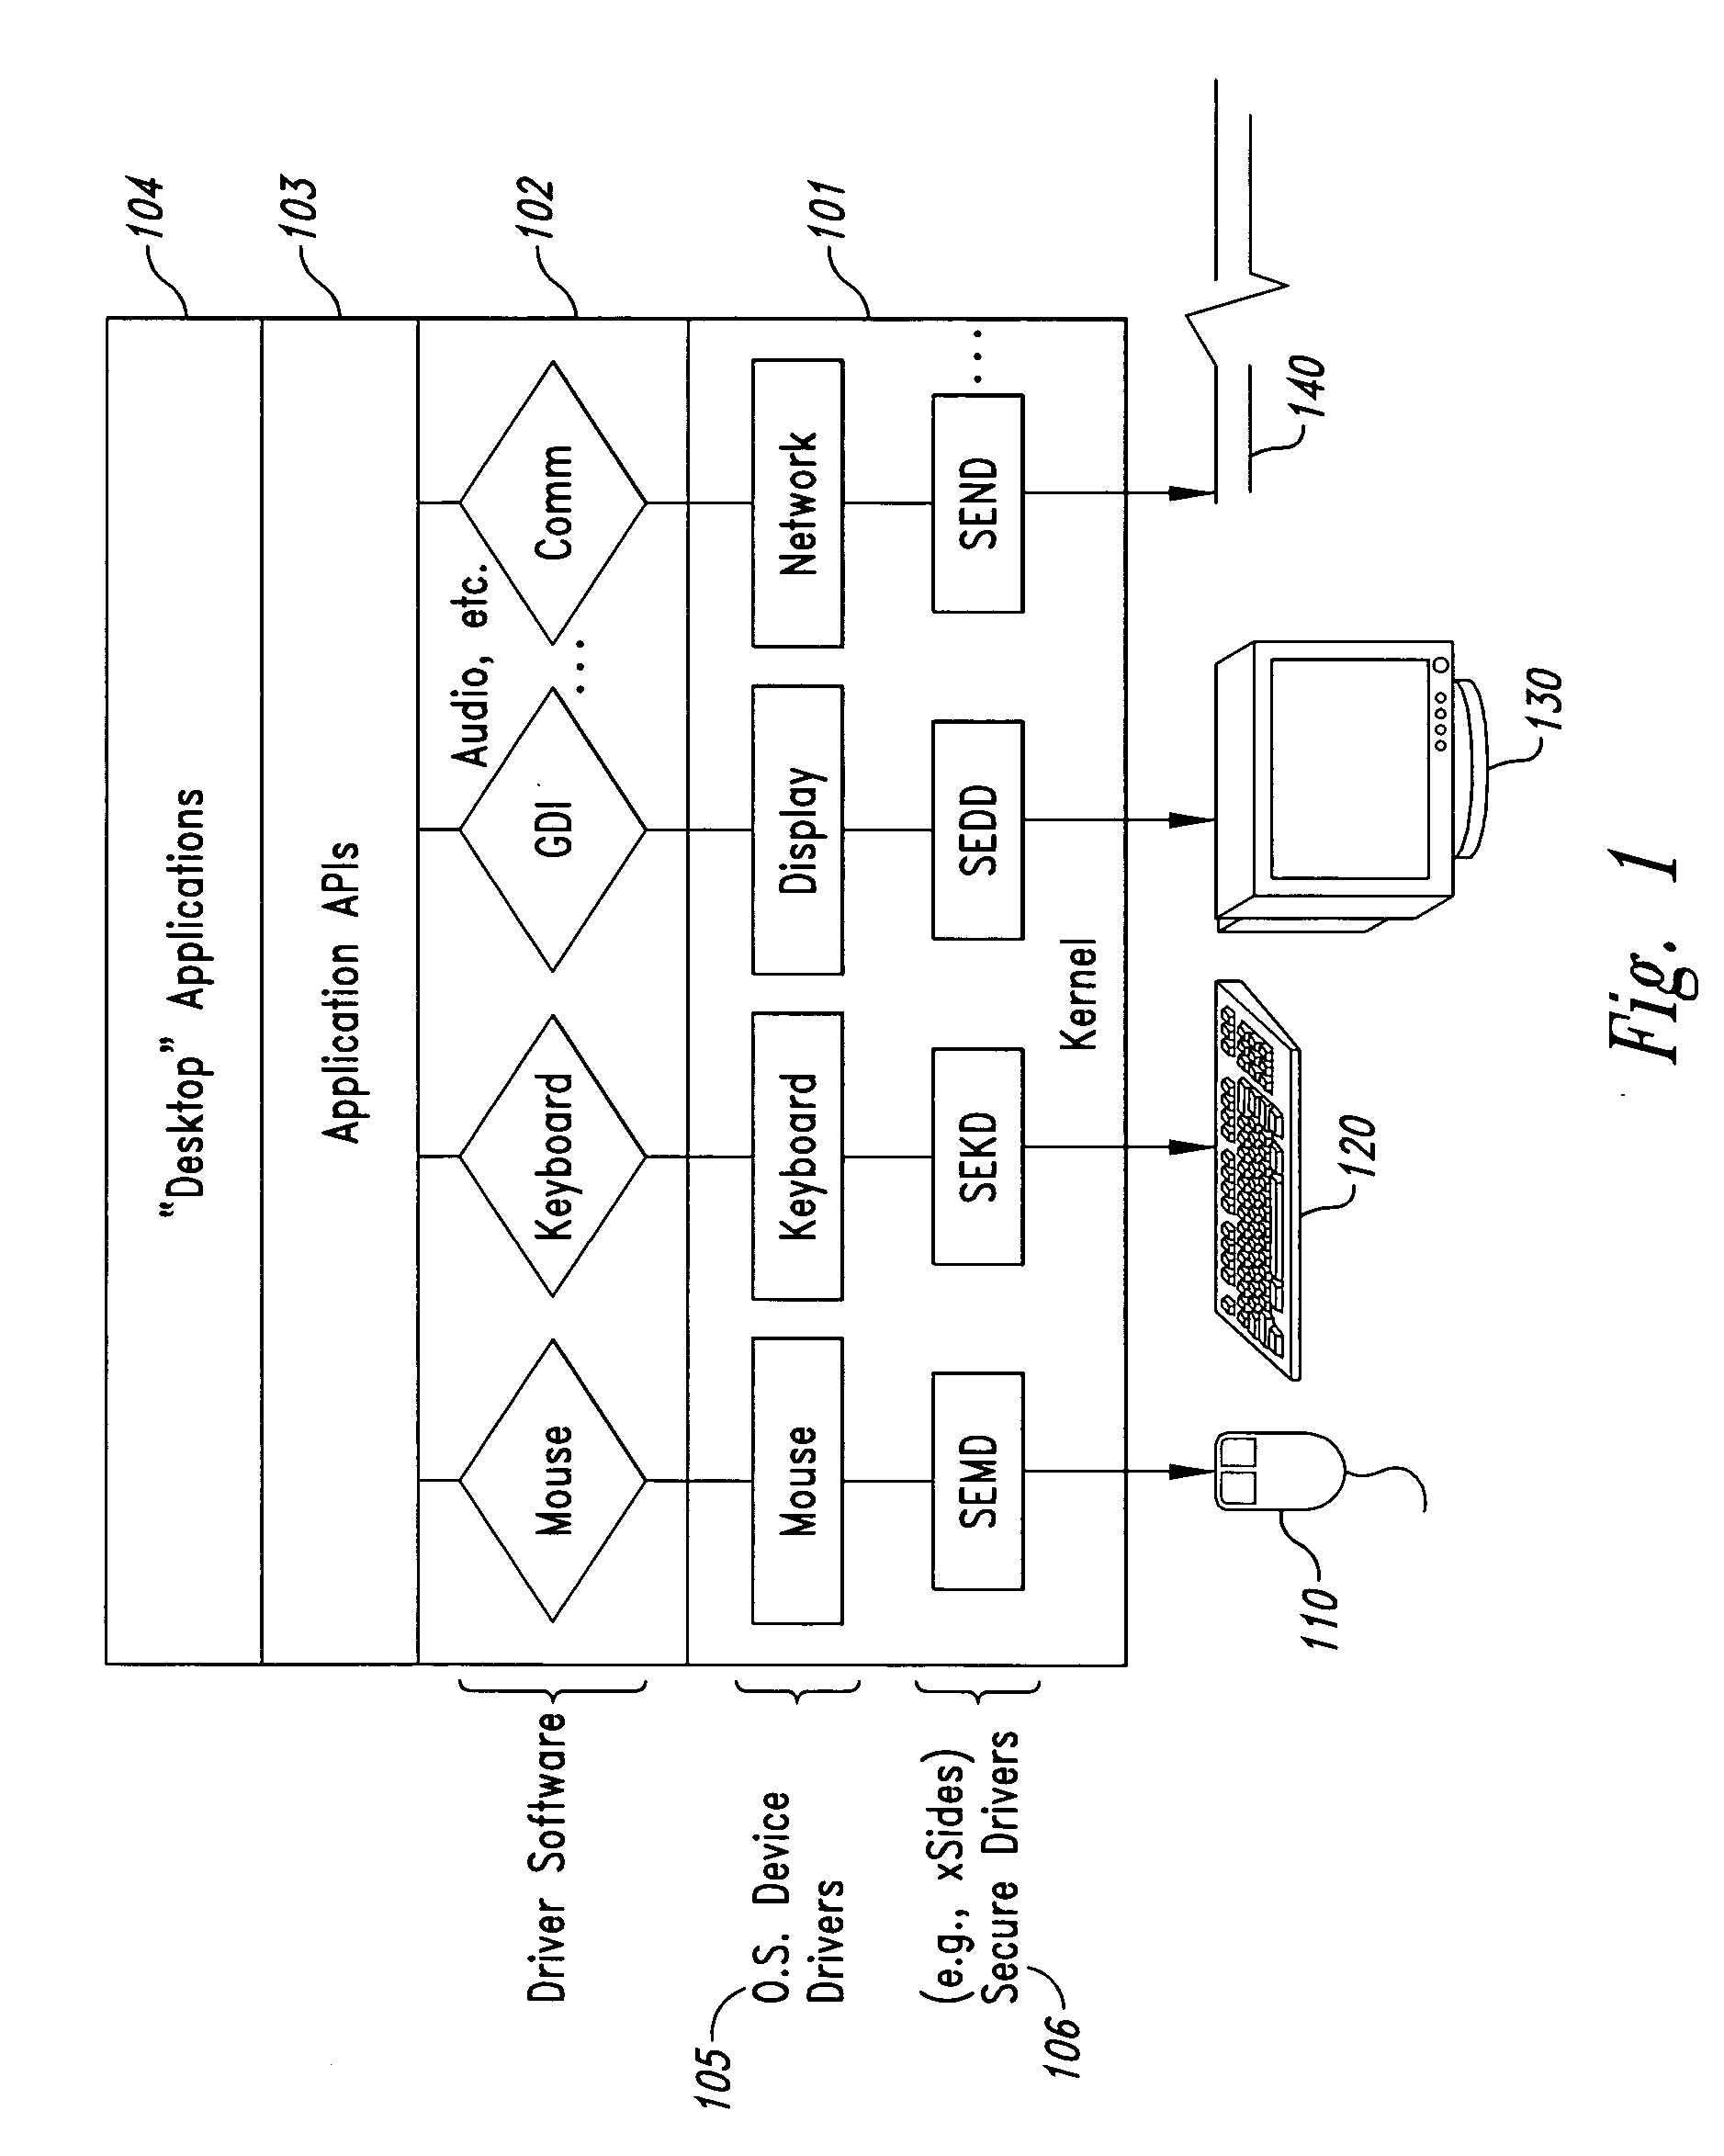 Method and system for maintaining secure data input and output